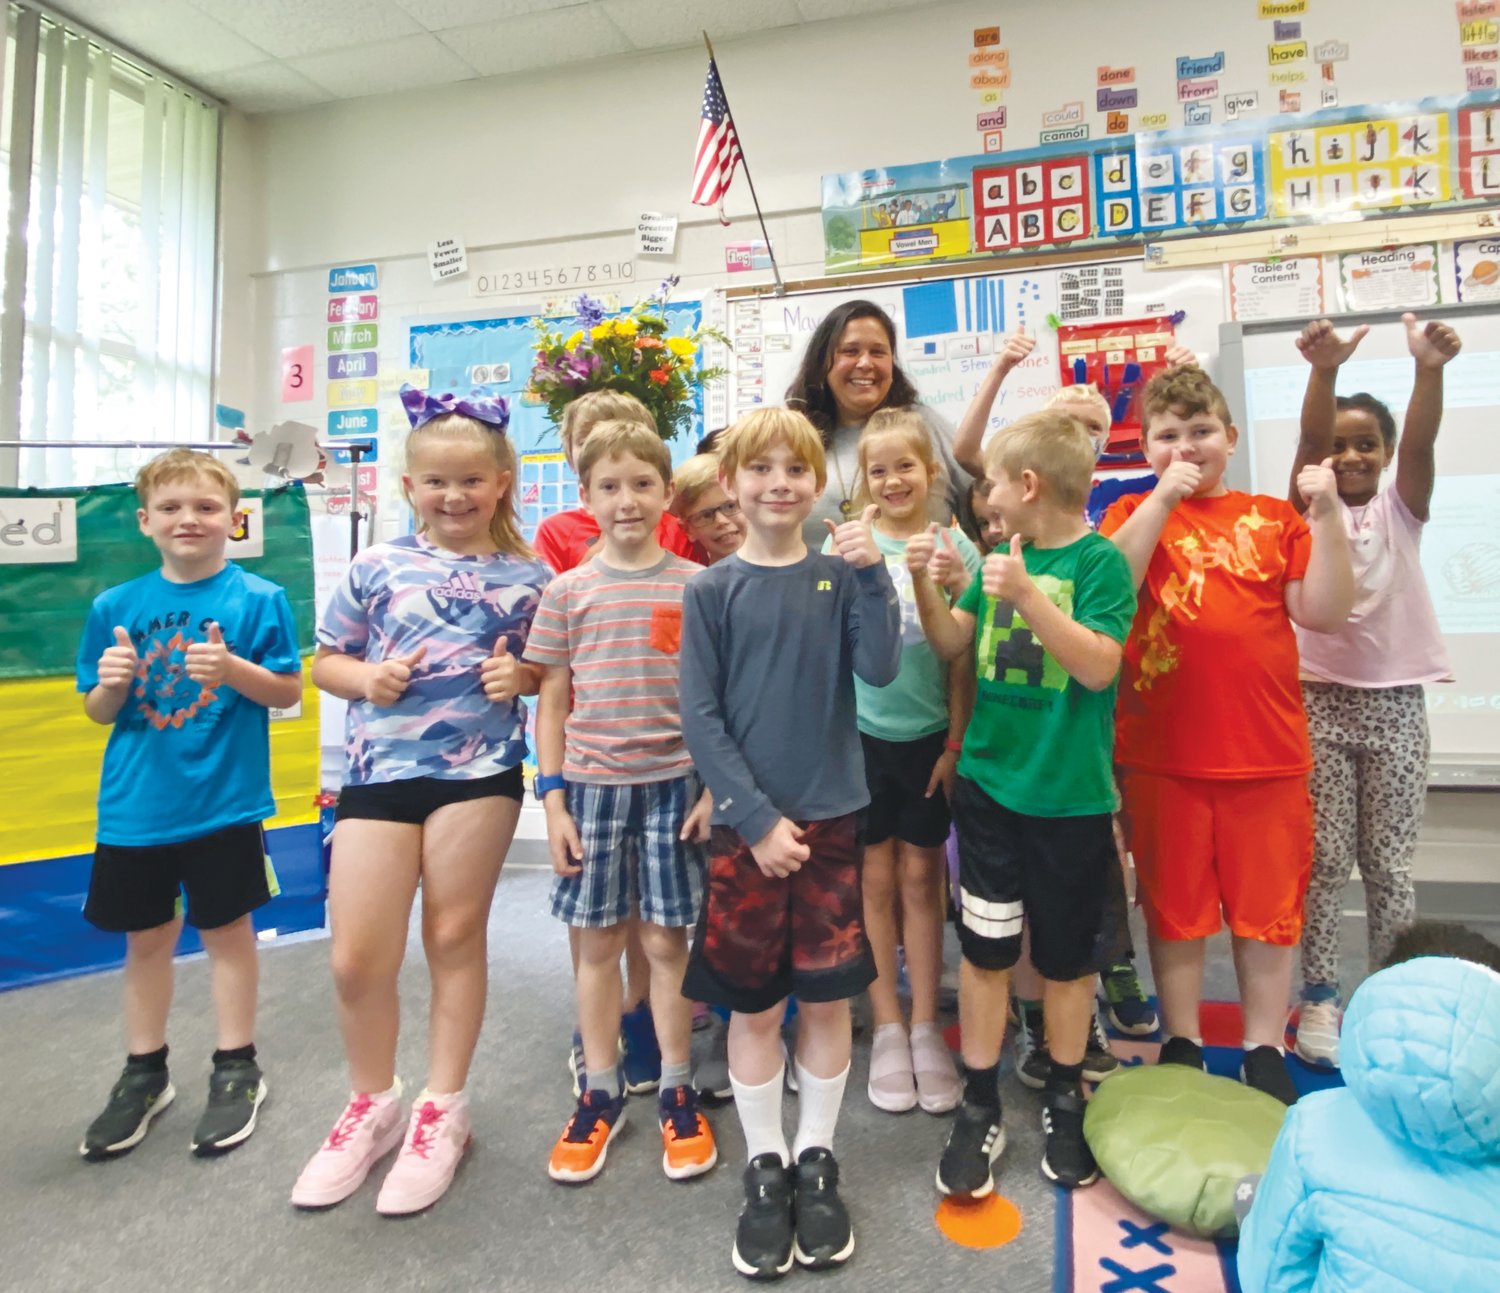 Students at North Chatham Elementary School give Nanette Atkinson (center, rear) thumbs-up for being chosen as the district's 2022-23 Instructional Assistant of the Year.